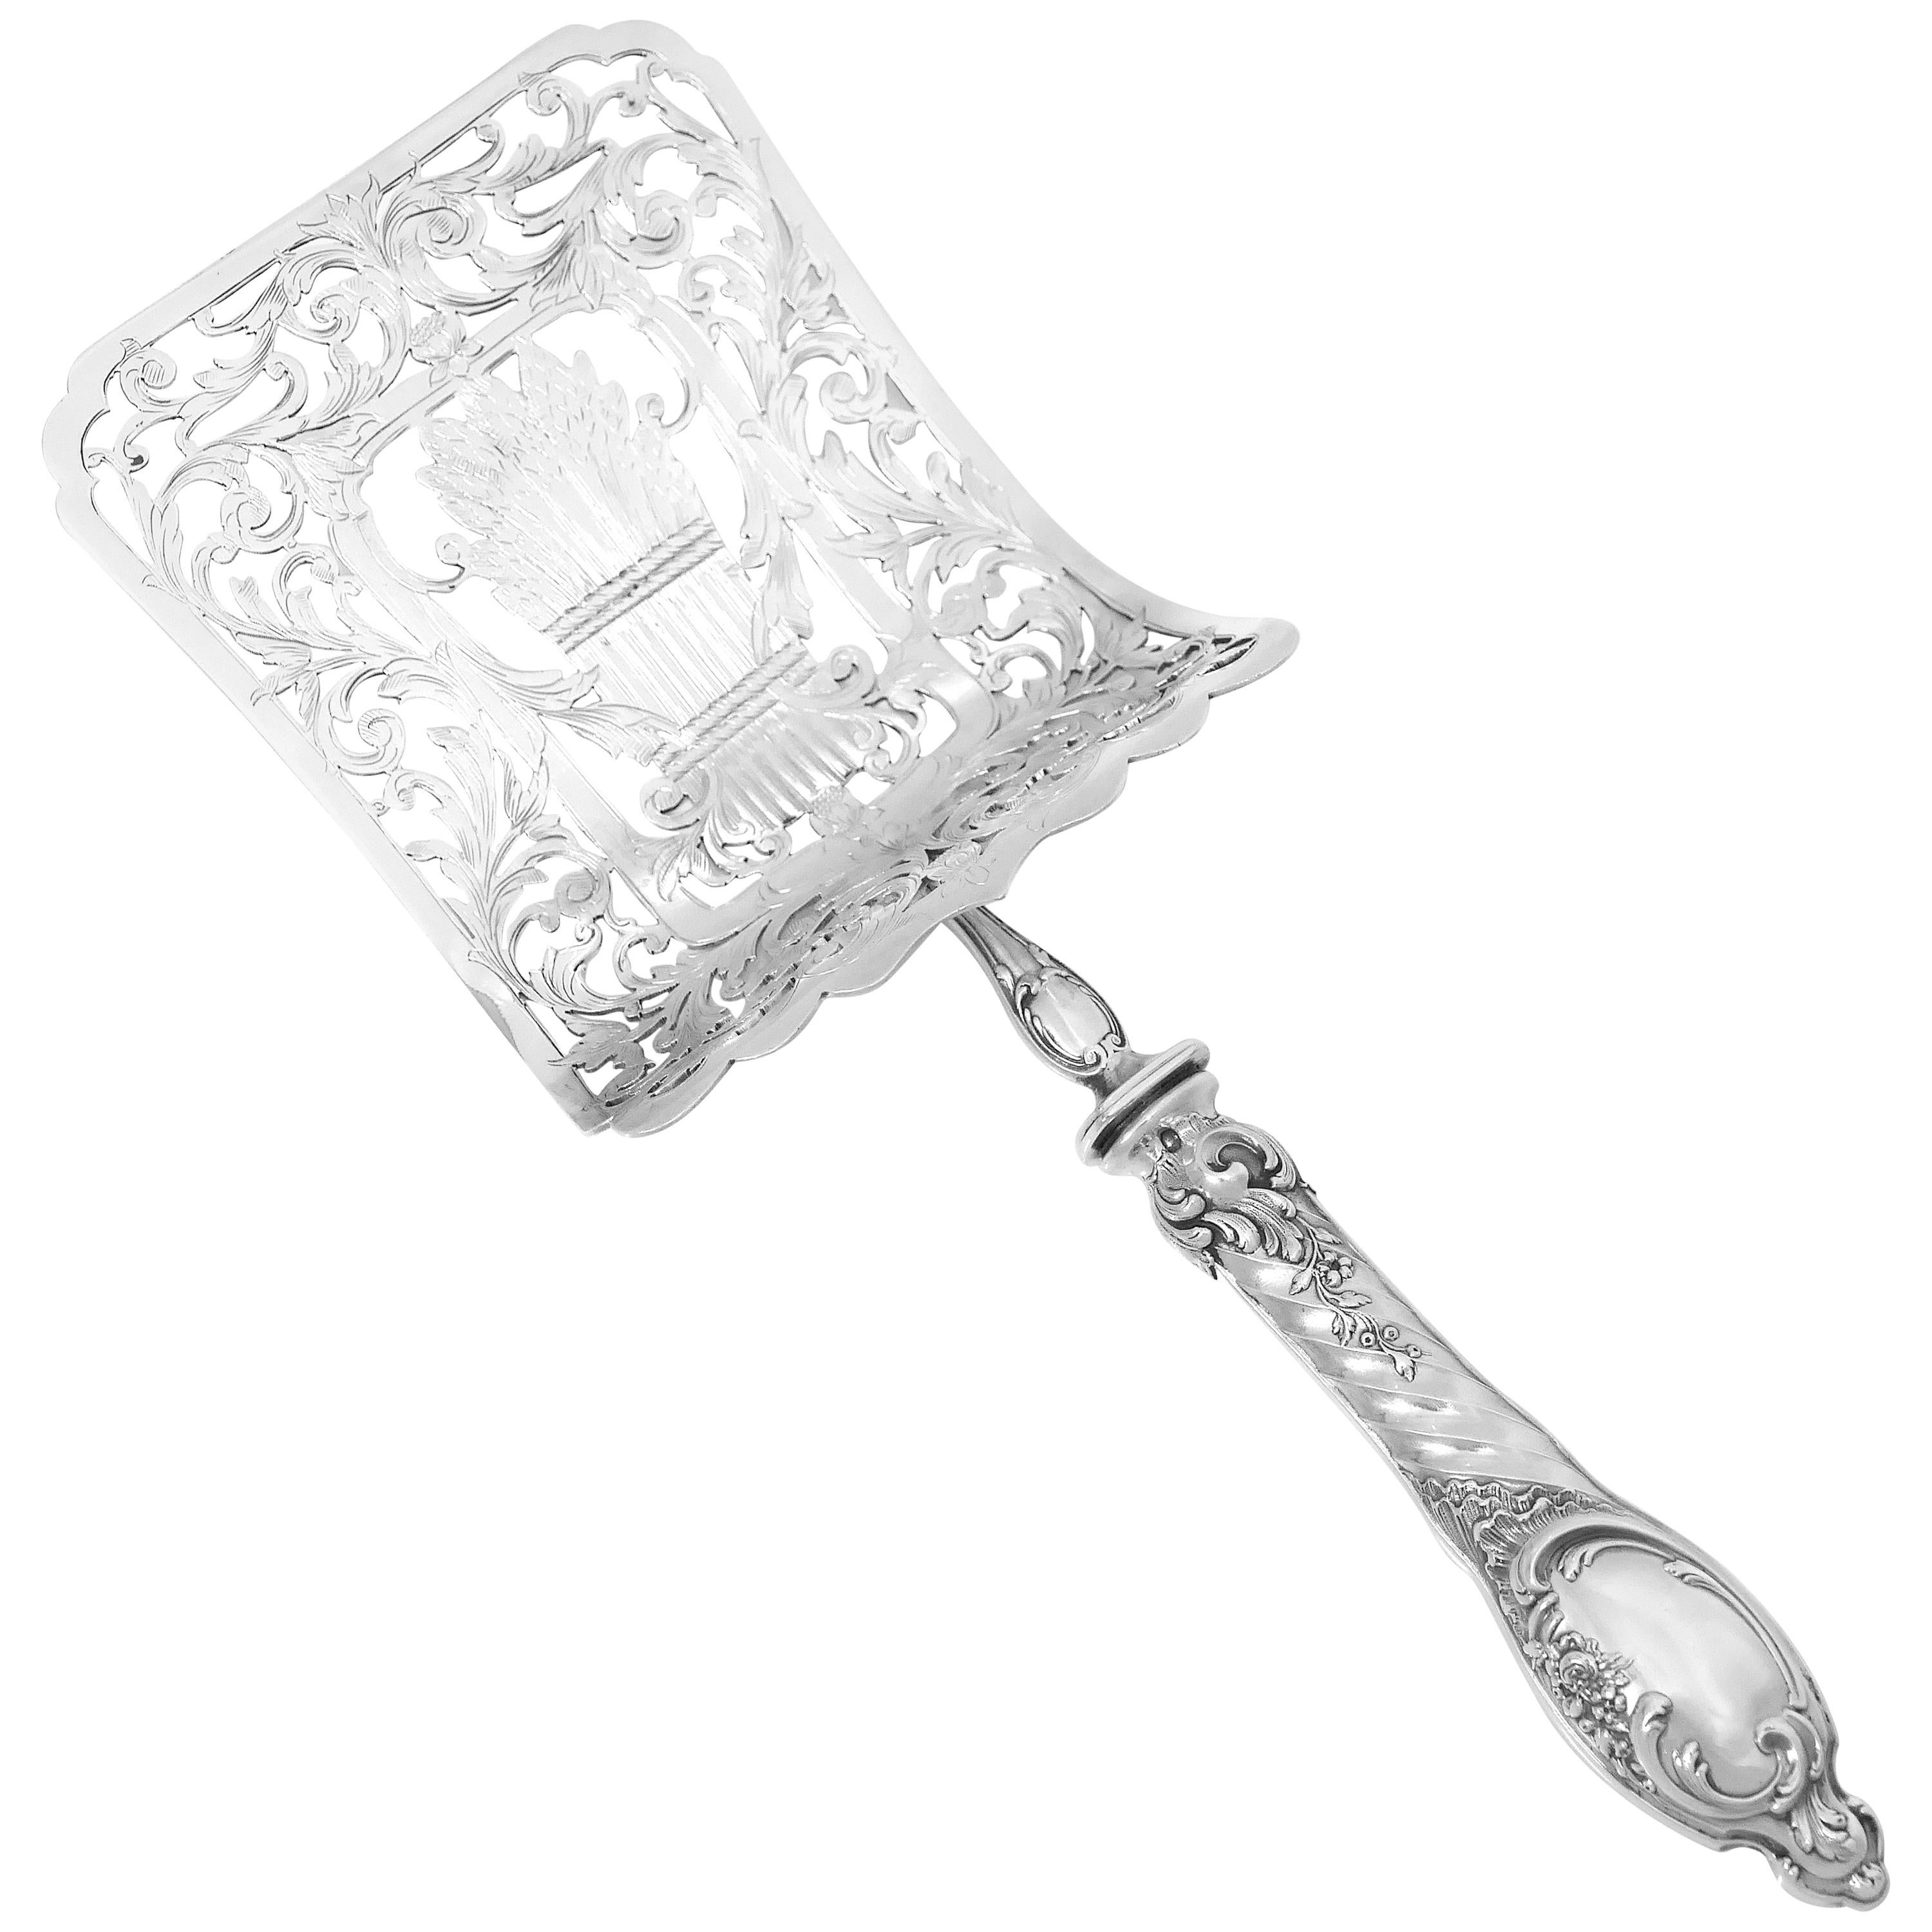 Puiforcat Rare French Sterling Silver Asparagus Pastry Toast Server